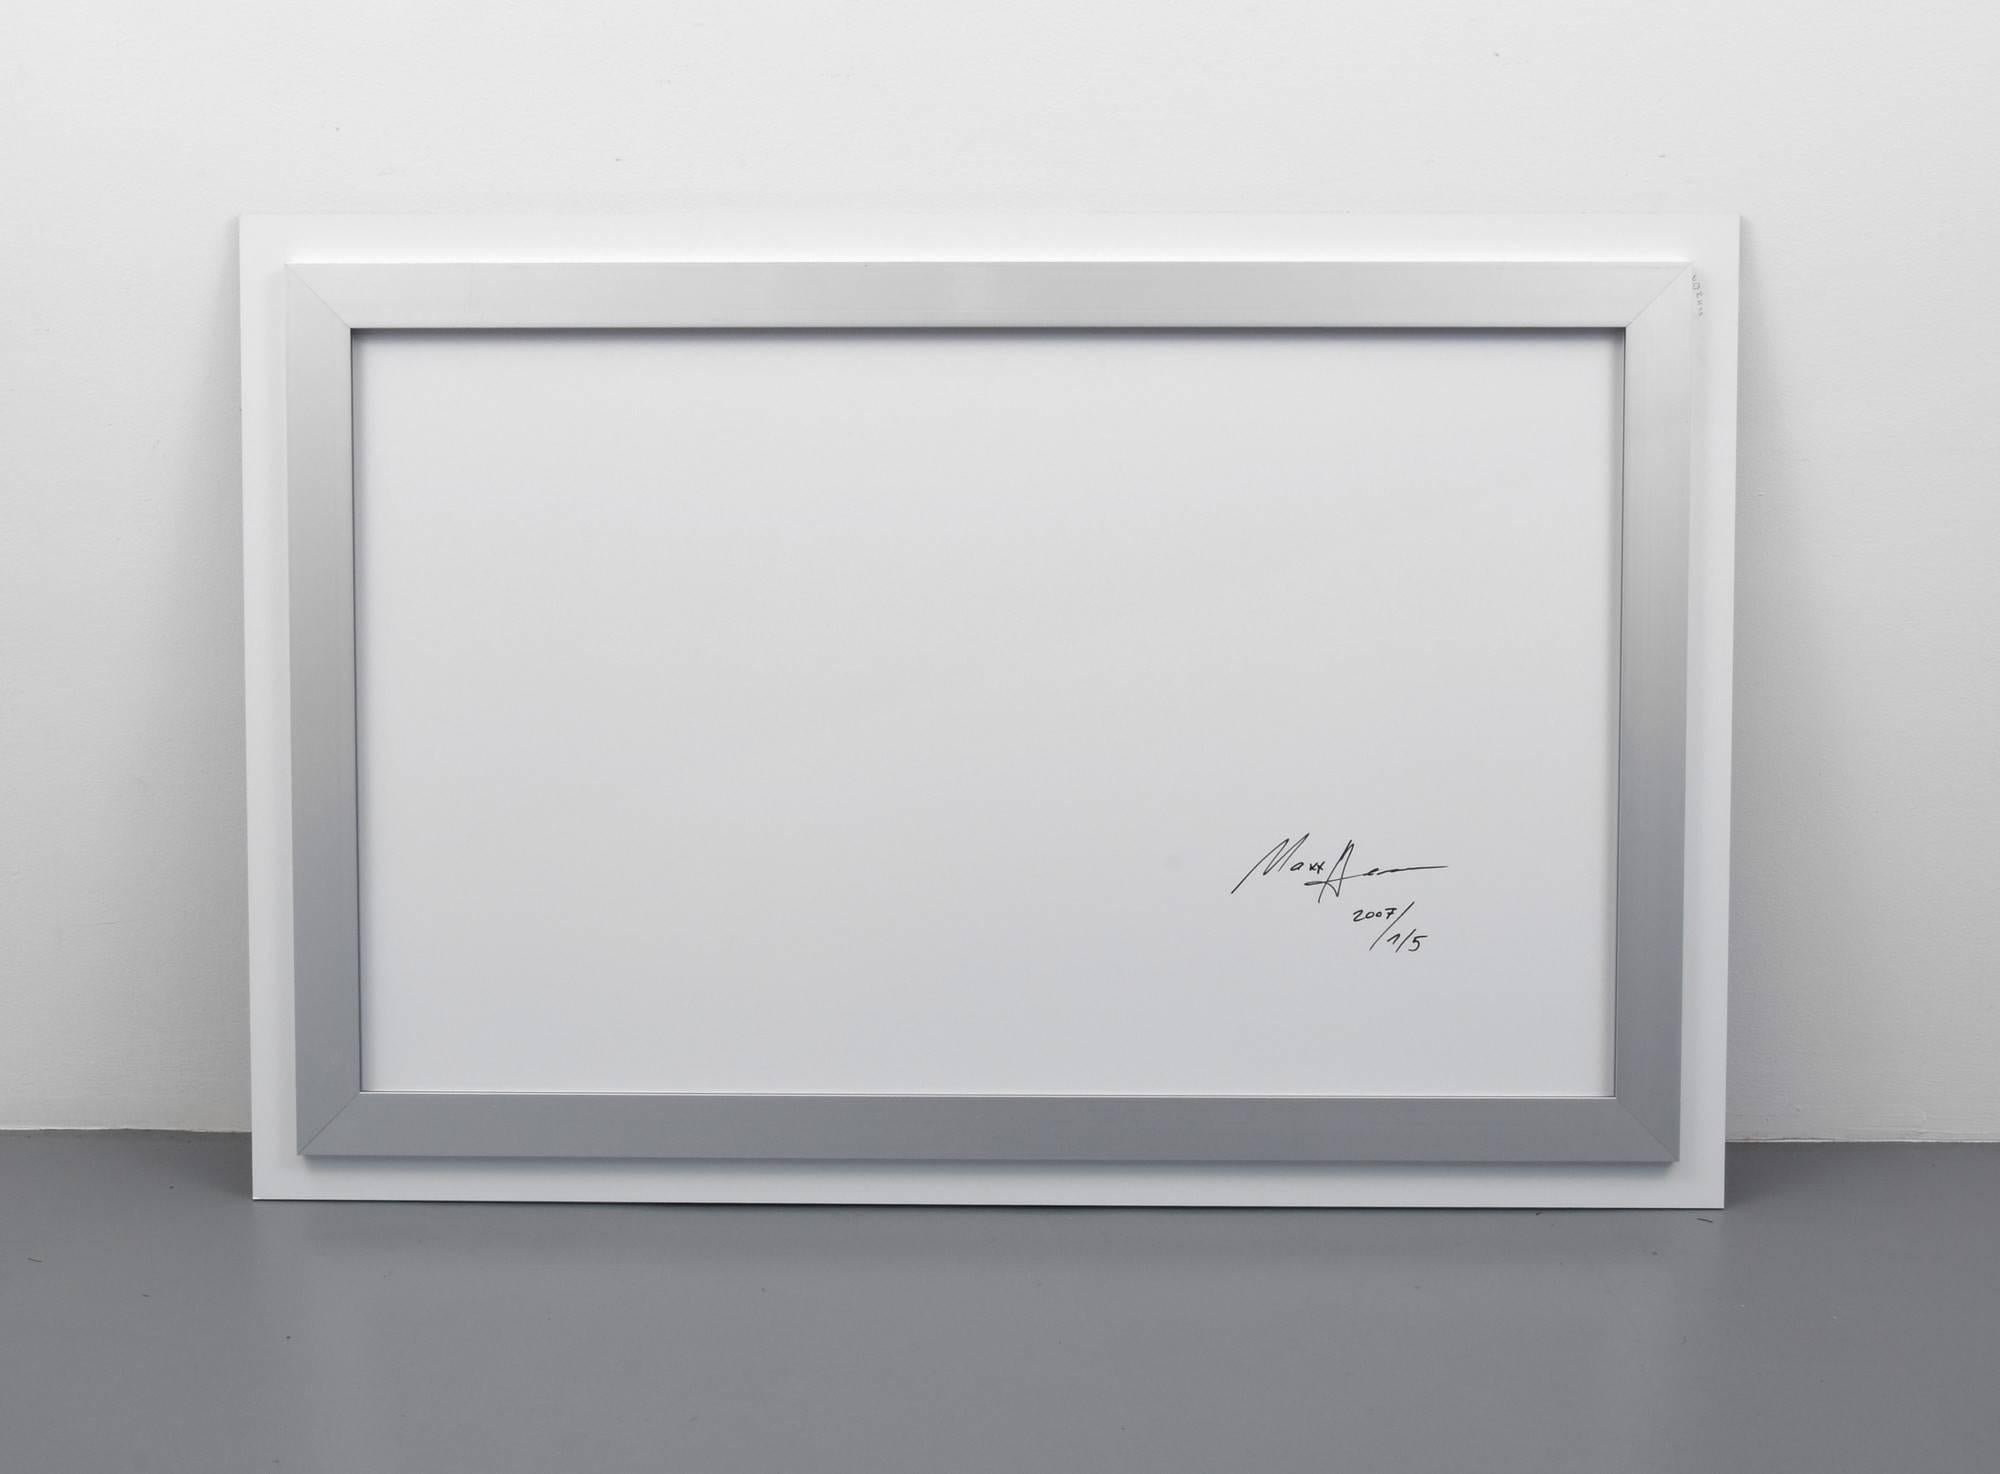 Large C-Print titled JOHN LENNON by Maxx Hermann (German, b. 1955). Work is signed, edition 1 of 5, and dated 2007. Provenance: Wolfgang Roth & Partners Fine Art, Miami, Florida. 

Please see our other large scale, graphic works listed on